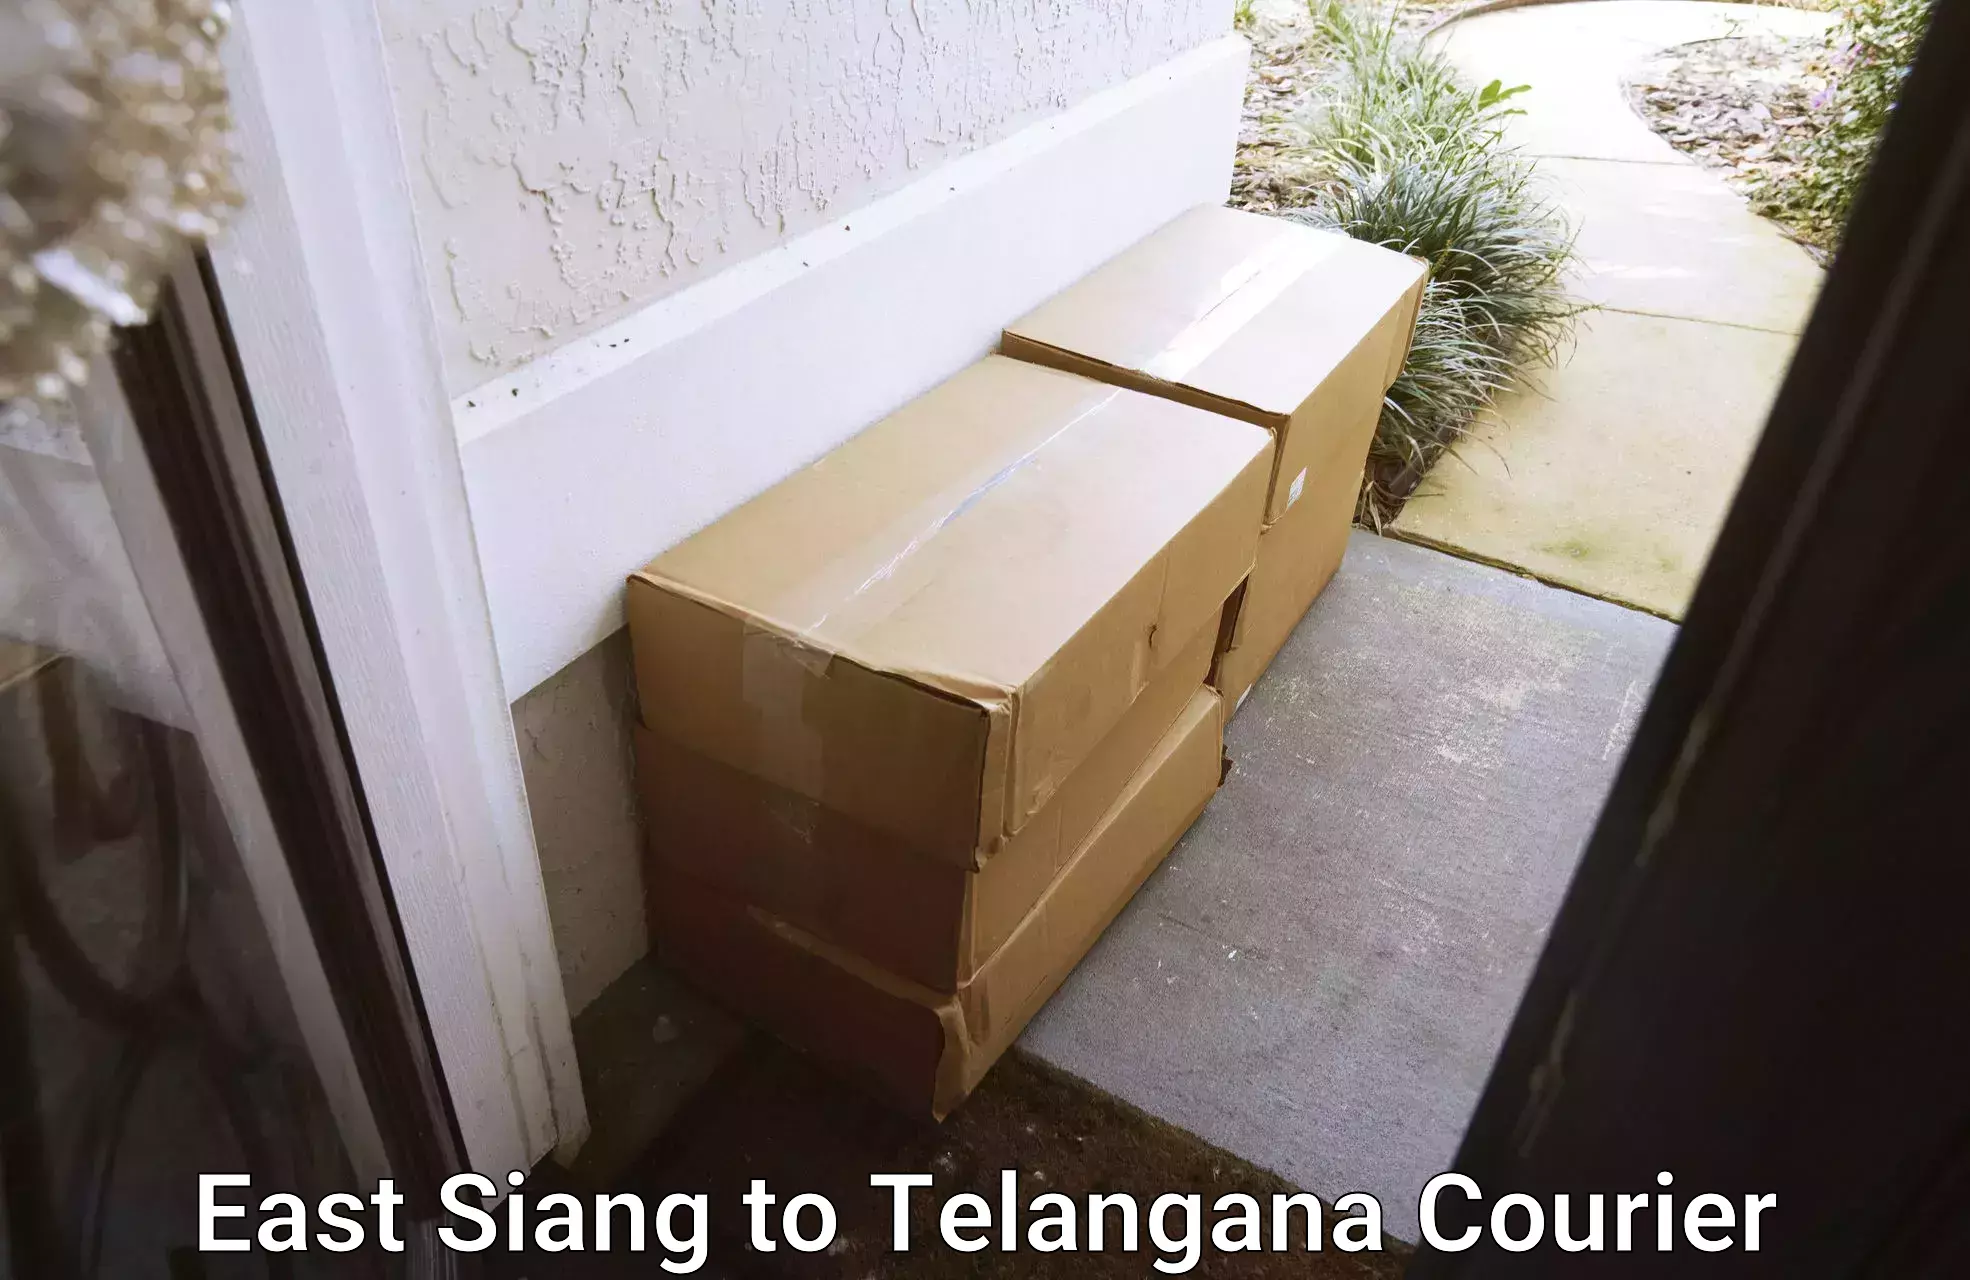 Same-day delivery solutions East Siang to Yellareddy